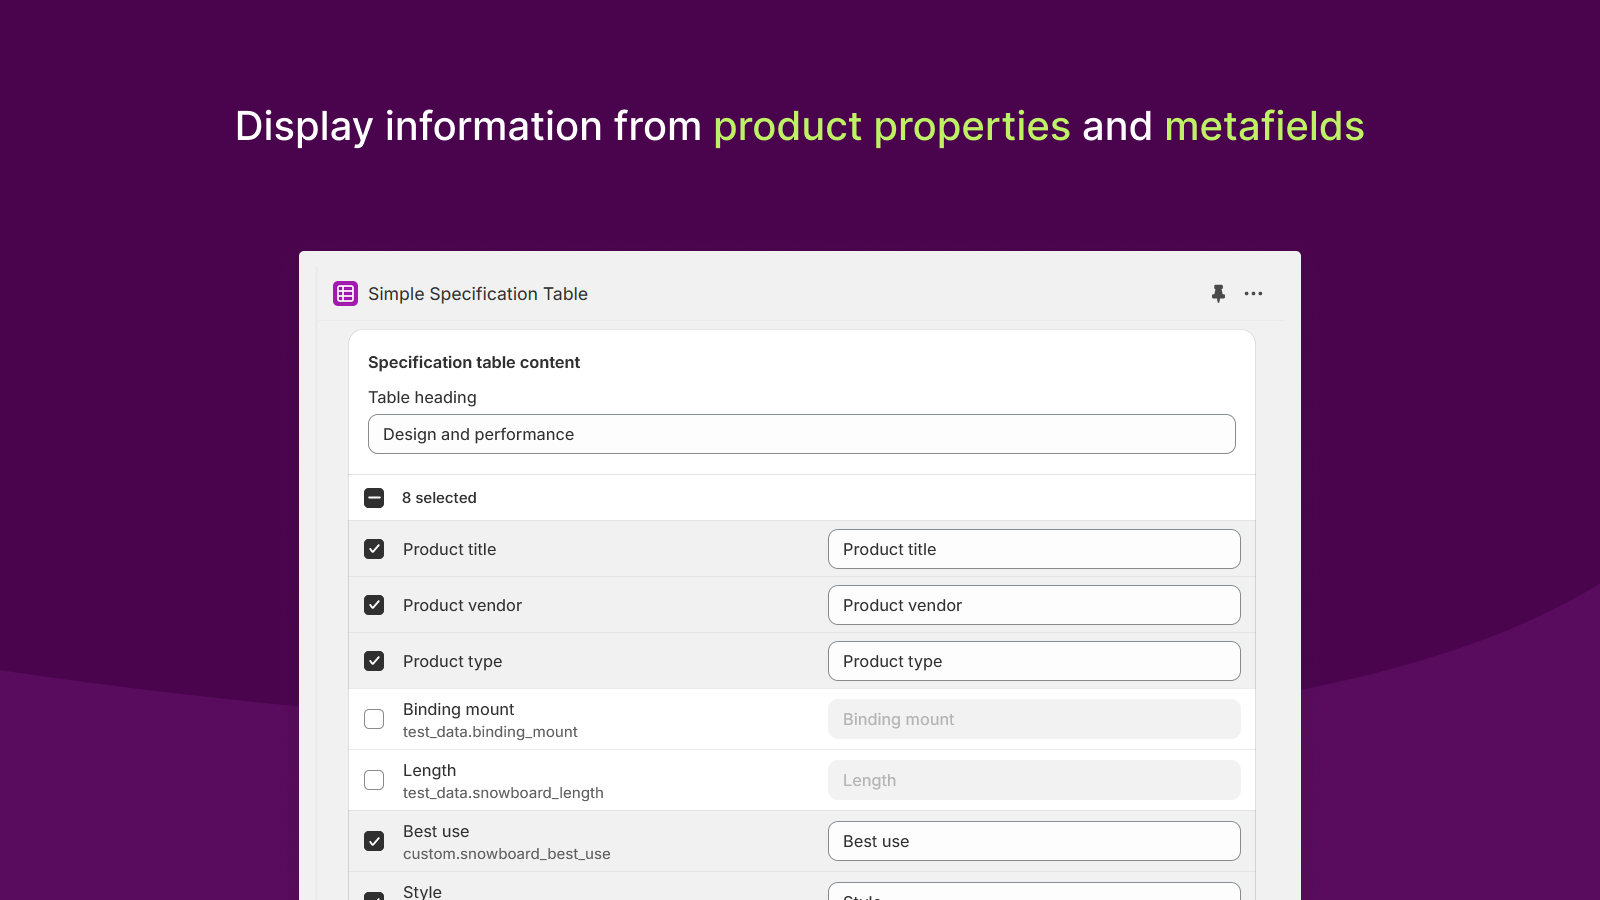 Display information from product properties and metafields